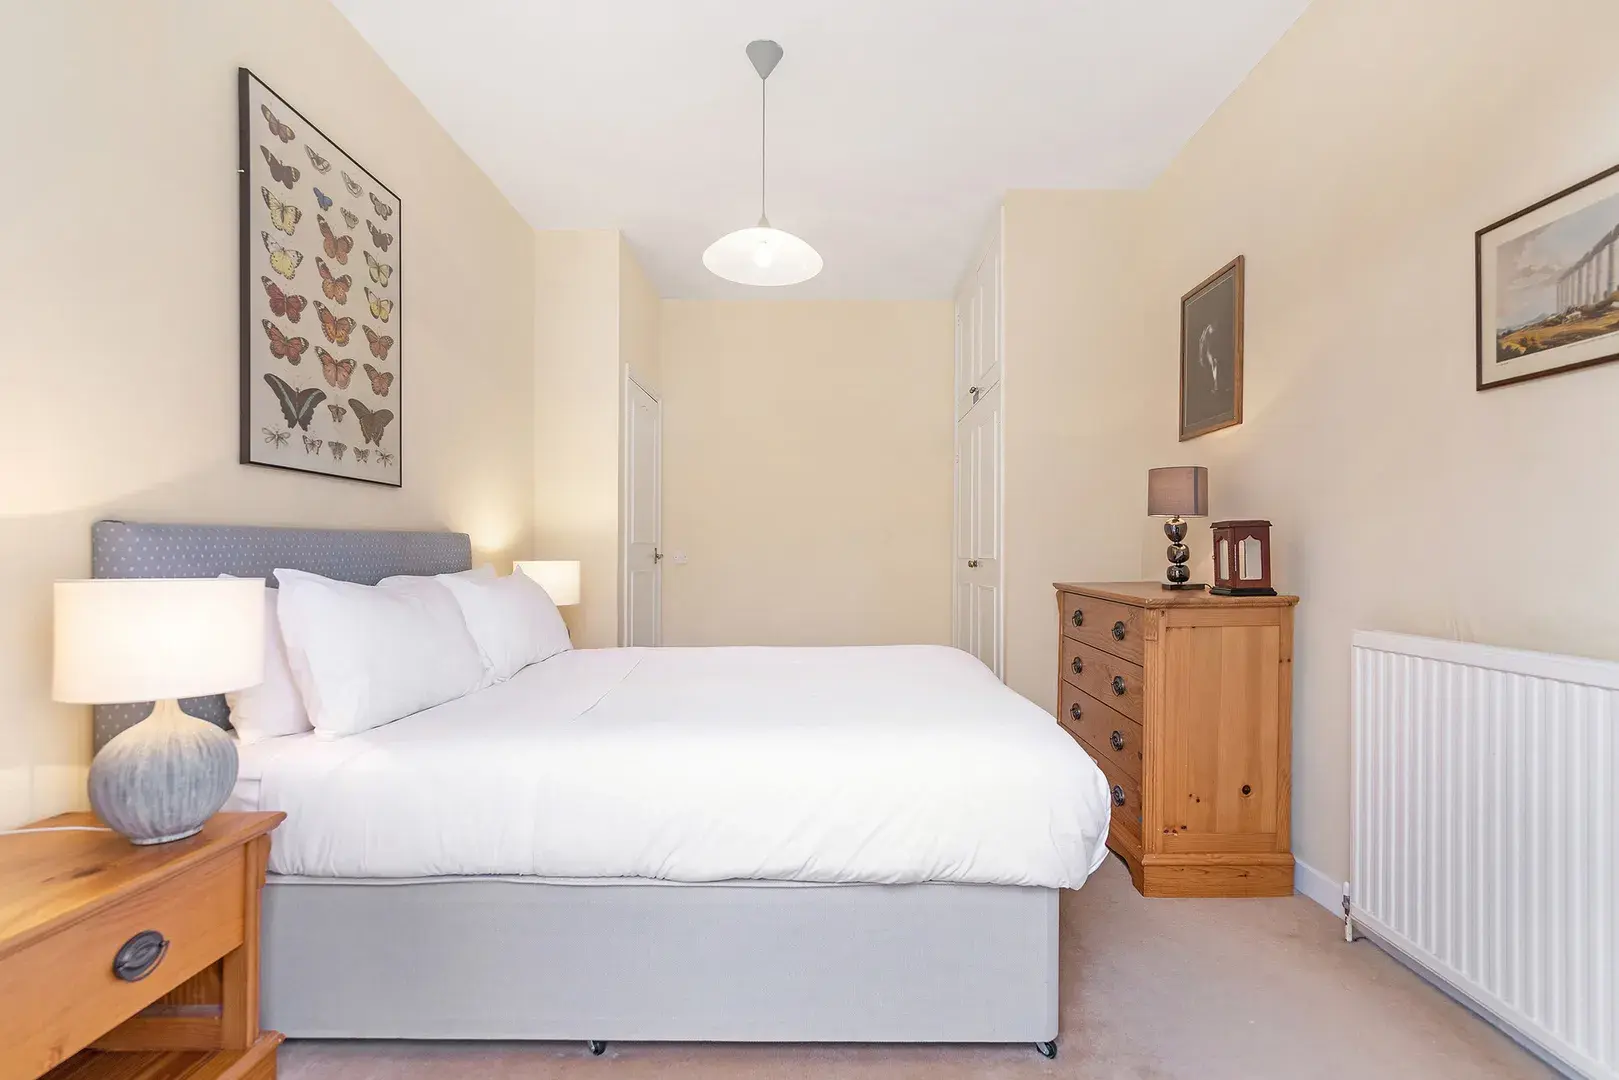 Westgate Terrace, holiday home in South Kensington, London